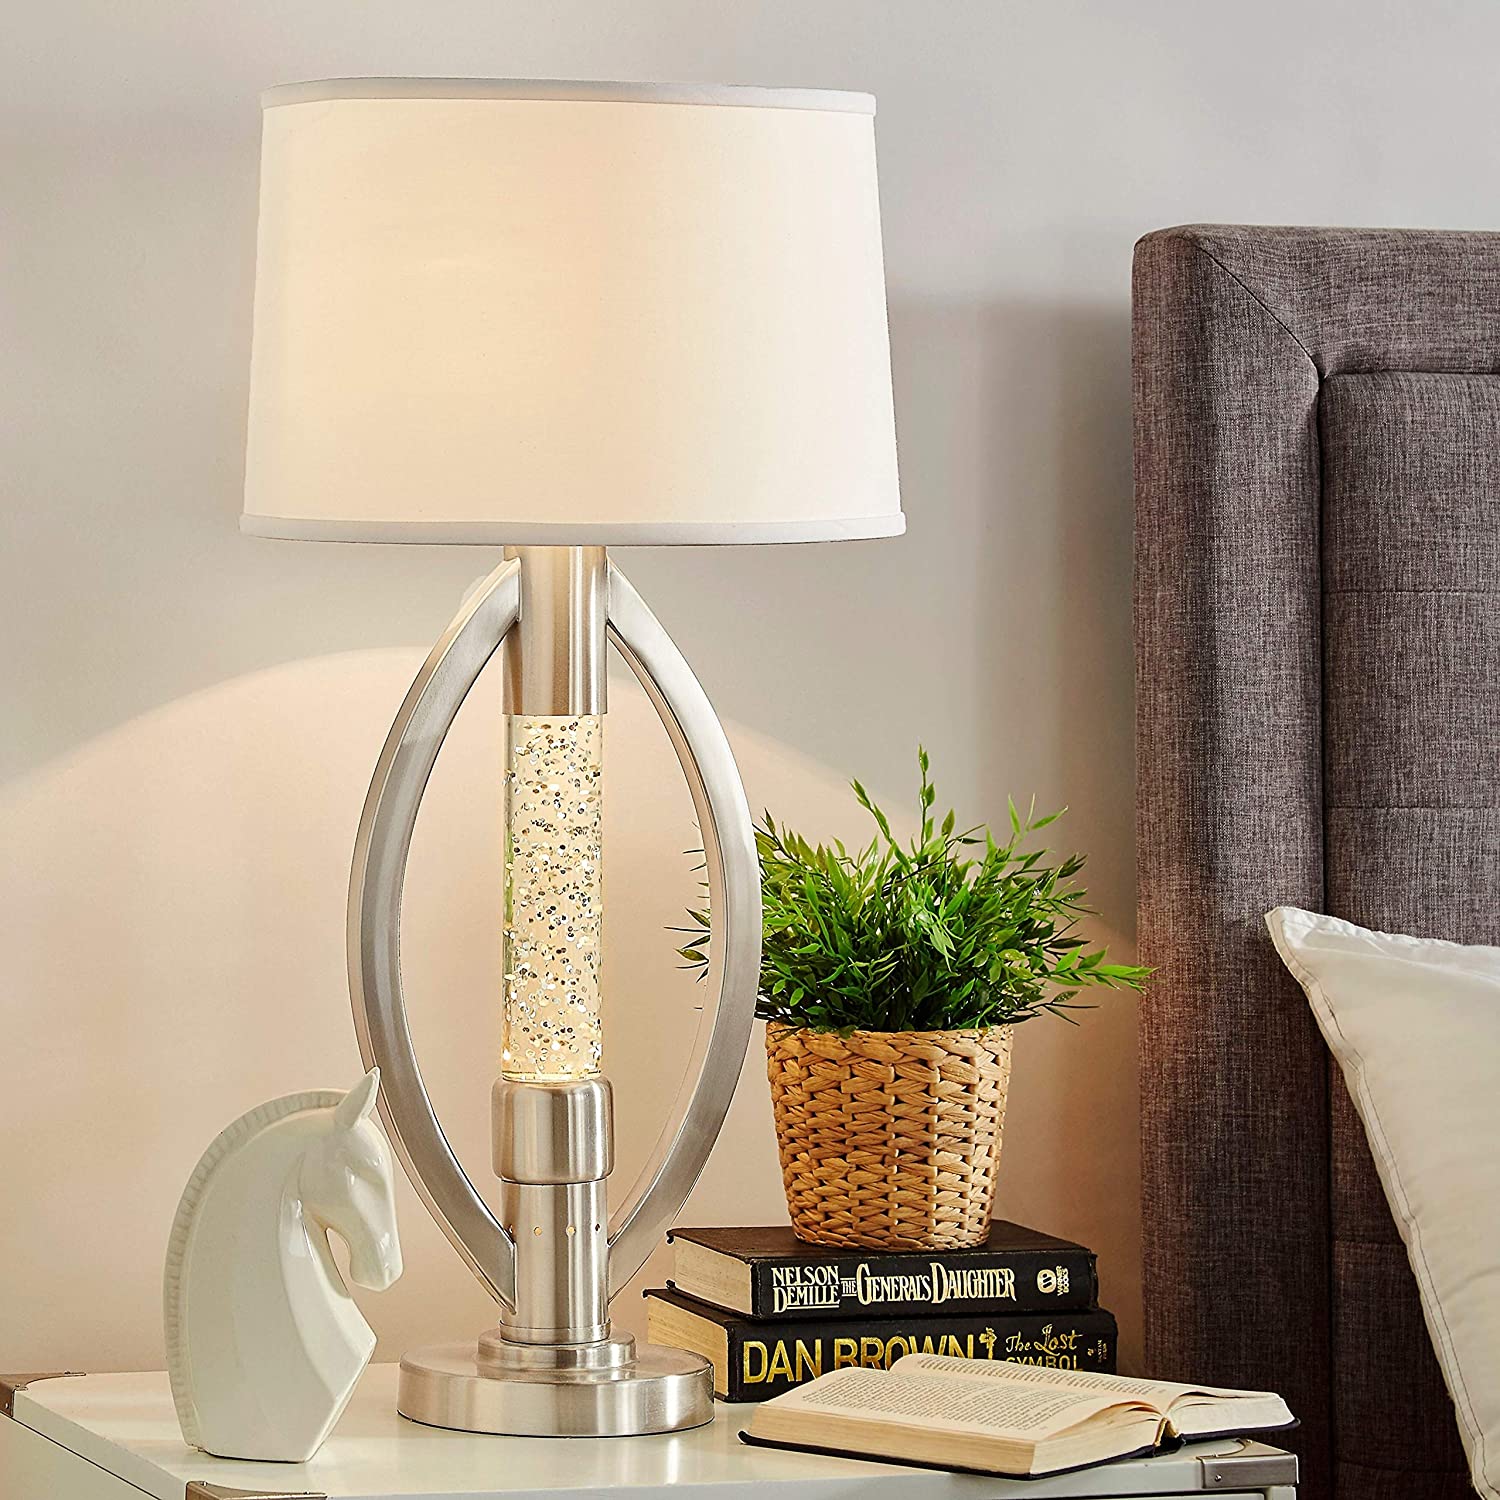 Accent Lamp/Table Lamp Silver Modern Contemporary Nickel Bulbs Included